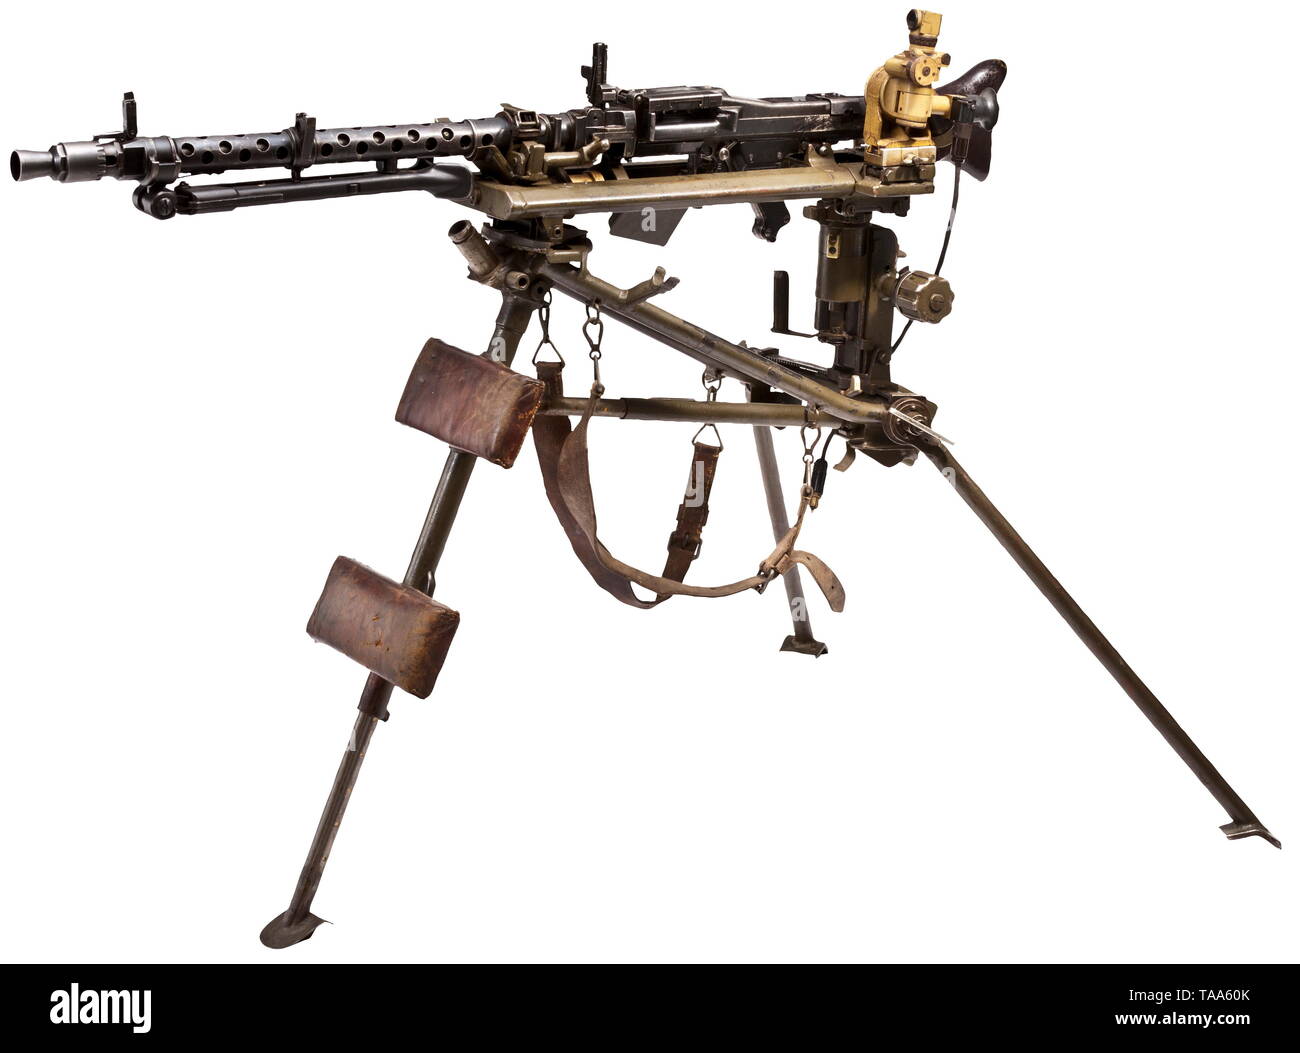 An original MG 34 on field carriage, de-activated weapon Cal. 8 x 57, no matching numbers. A 1938 BSW production. Bipod. Original finish with signs of usage. Good to very good overall condition. All parts moveable. Certified modification. Original tripod carriage from 'S/652' 1941 production, acceptance mark eagle/WaA79, green Wehrmacht varnish, little signs of usage. Complete with aluminium overhead firing table, knee pad with leather cover and both leather carrying straps. Technically in good order. Comes with complete, mounted, sand-coloured varnished target optics, code, Editorial-Use-Only Stock Photo